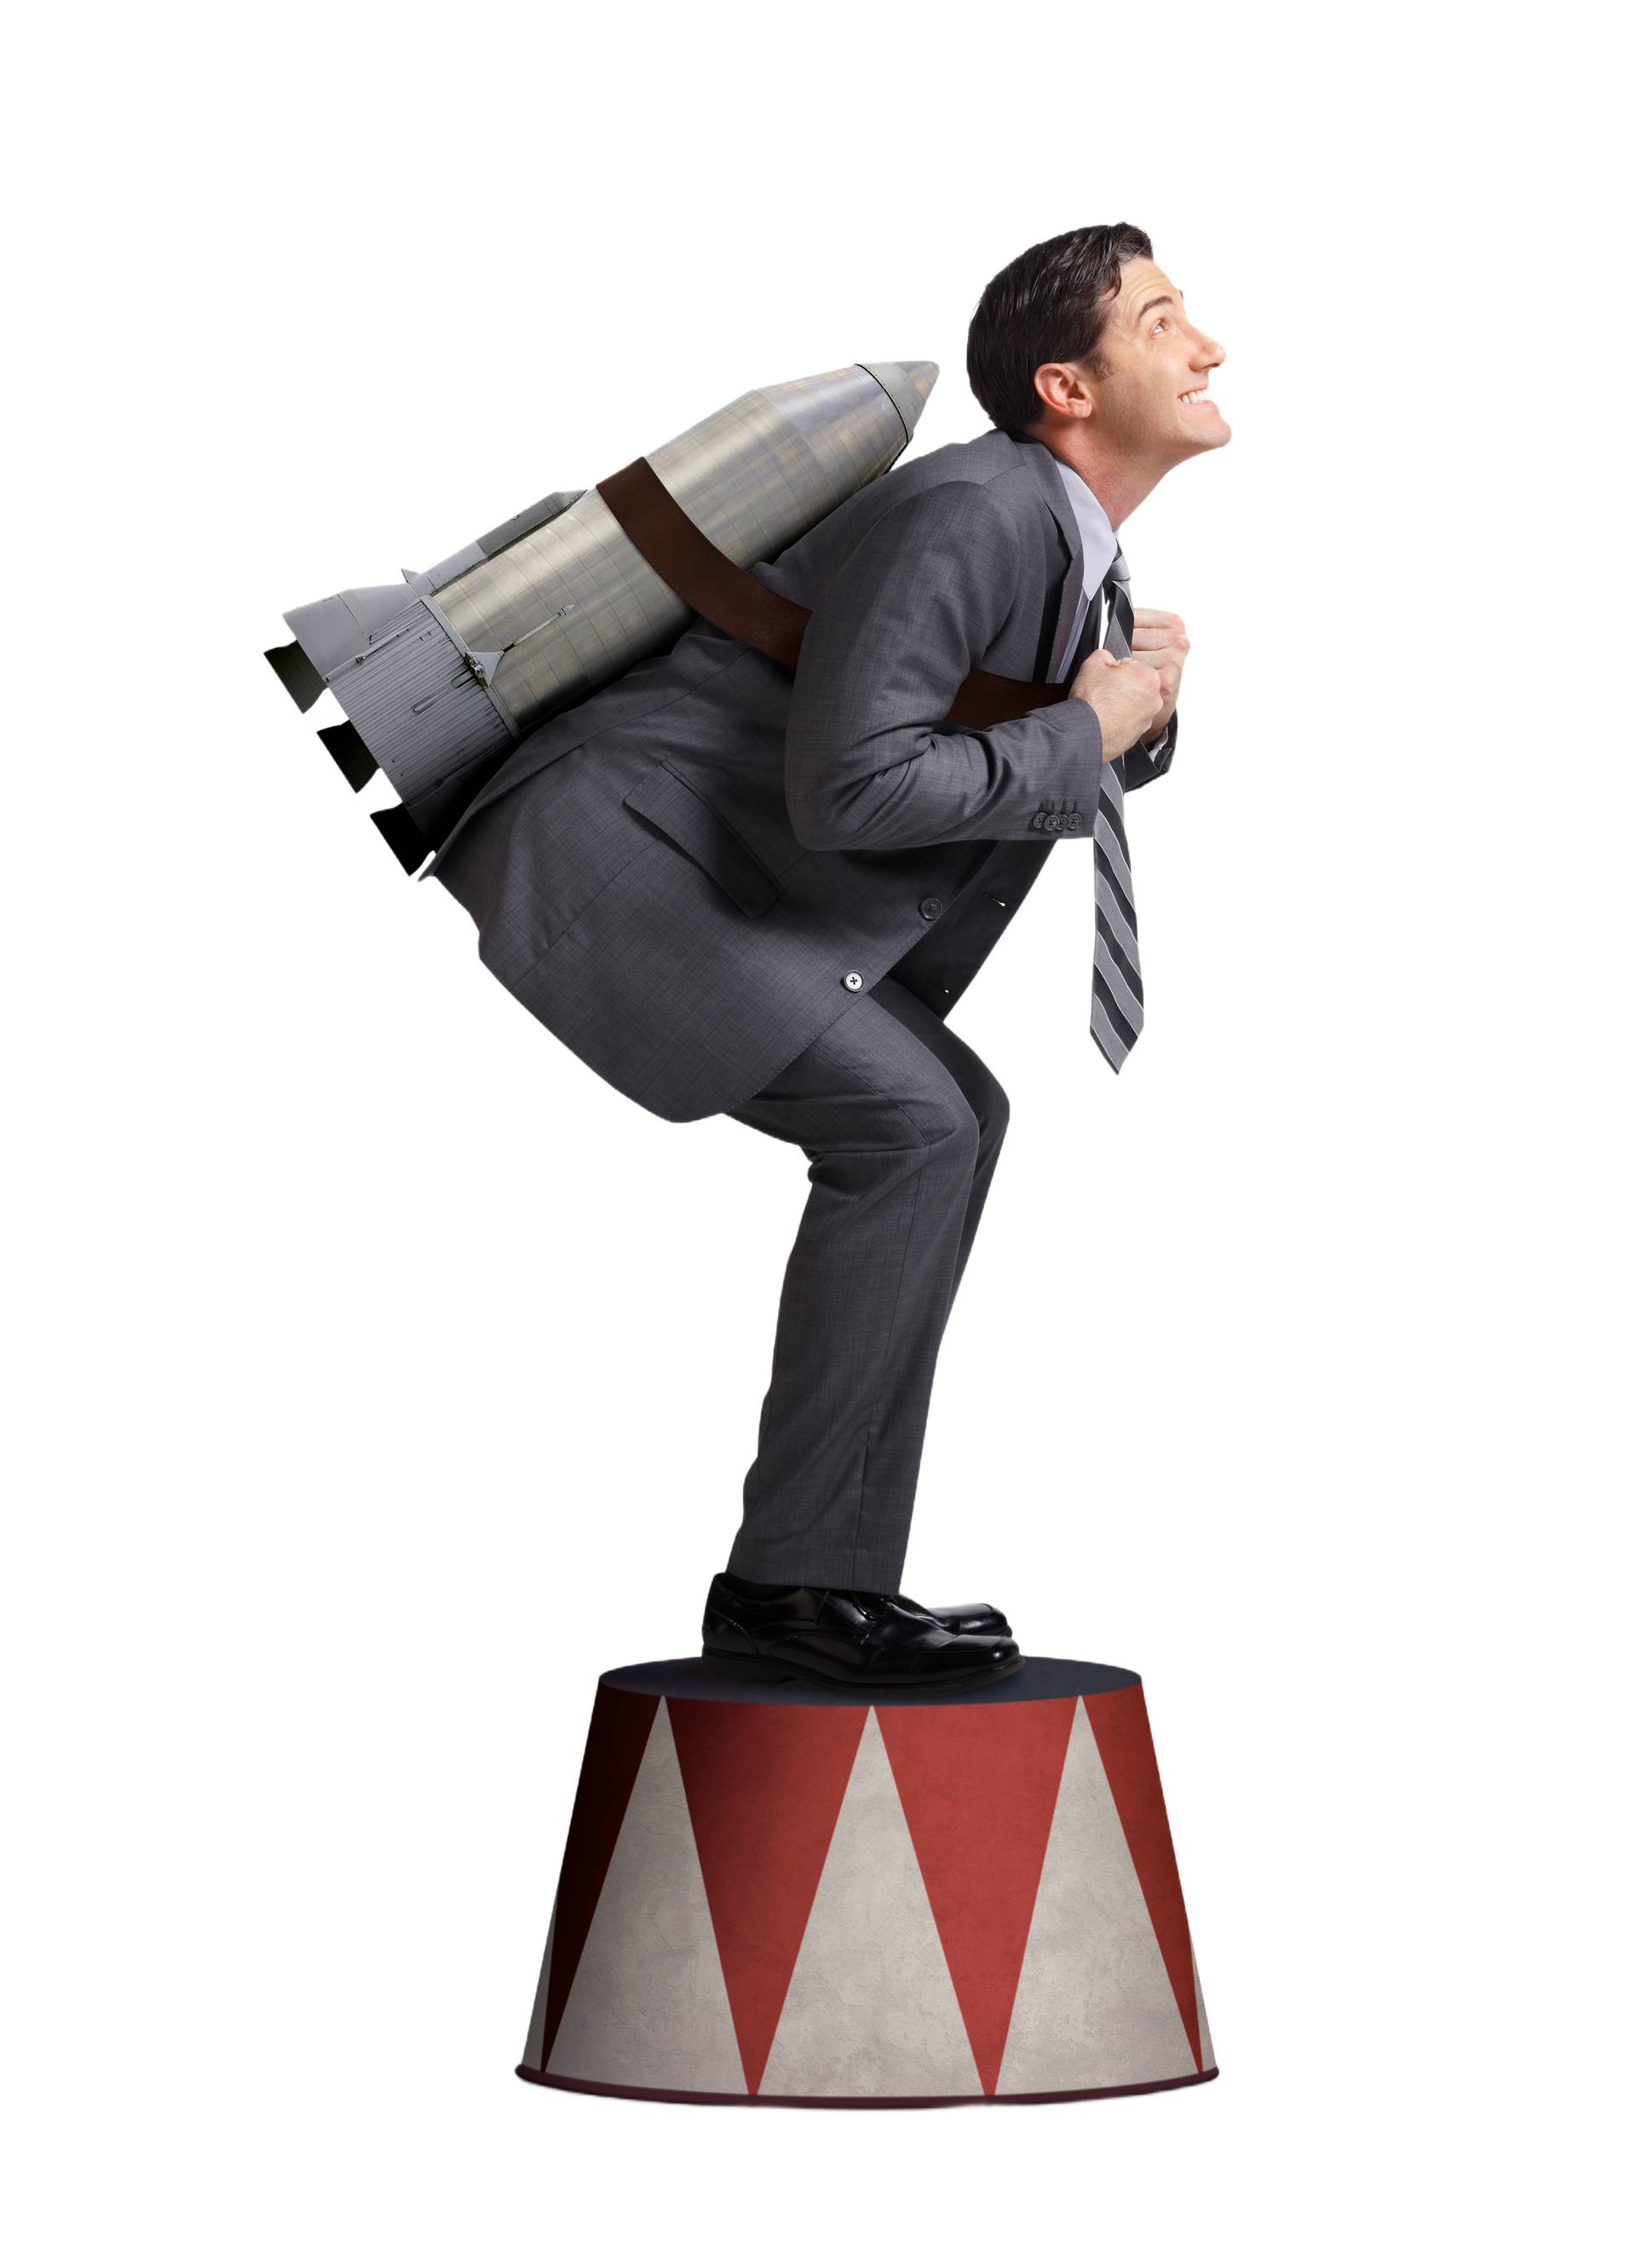 This is an image of a man squatted down with a rocket strapped to his back. ConsultSmart LLC SEO can skyrocket your website.